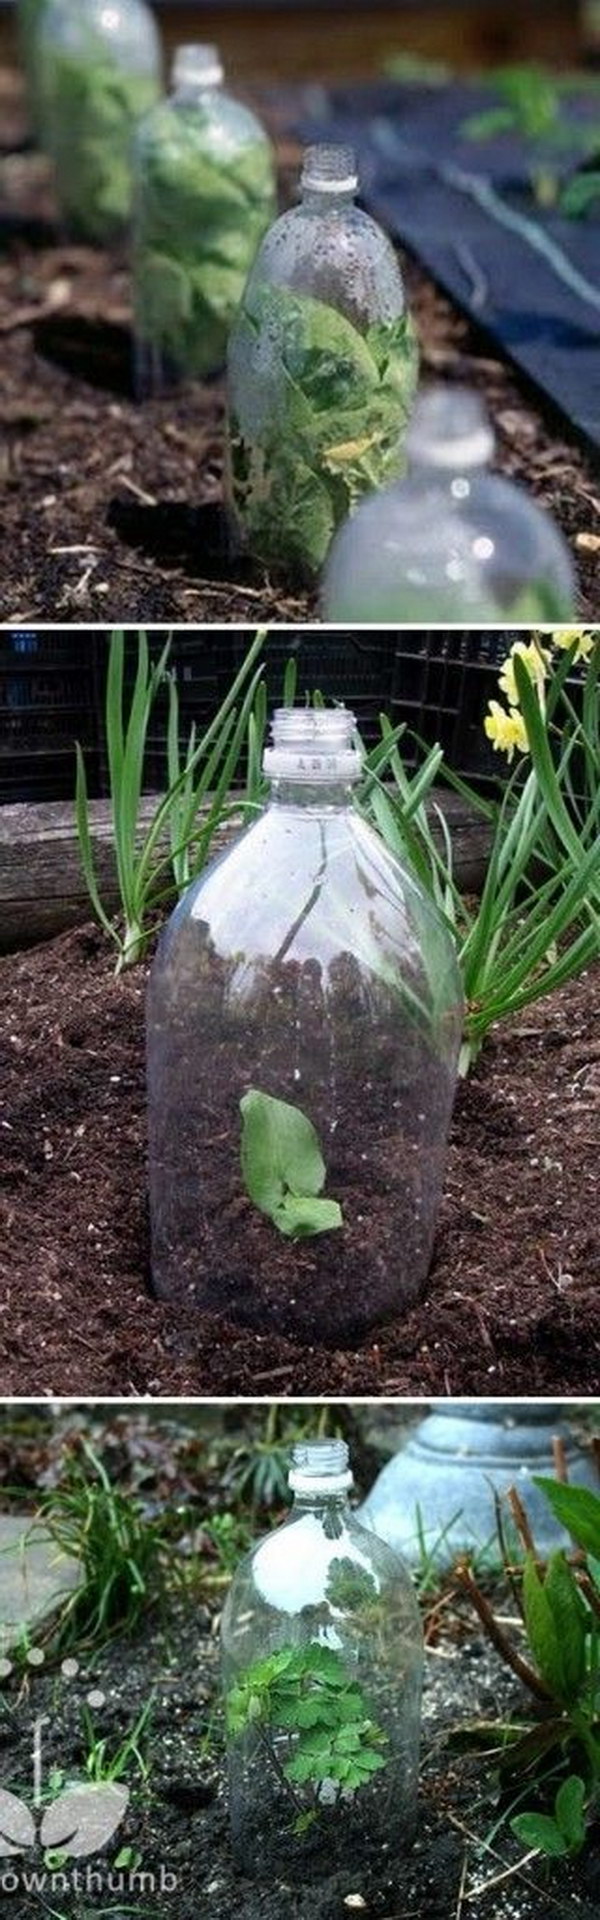 Or build a mini greenhouse with 2 liter soda bottles 